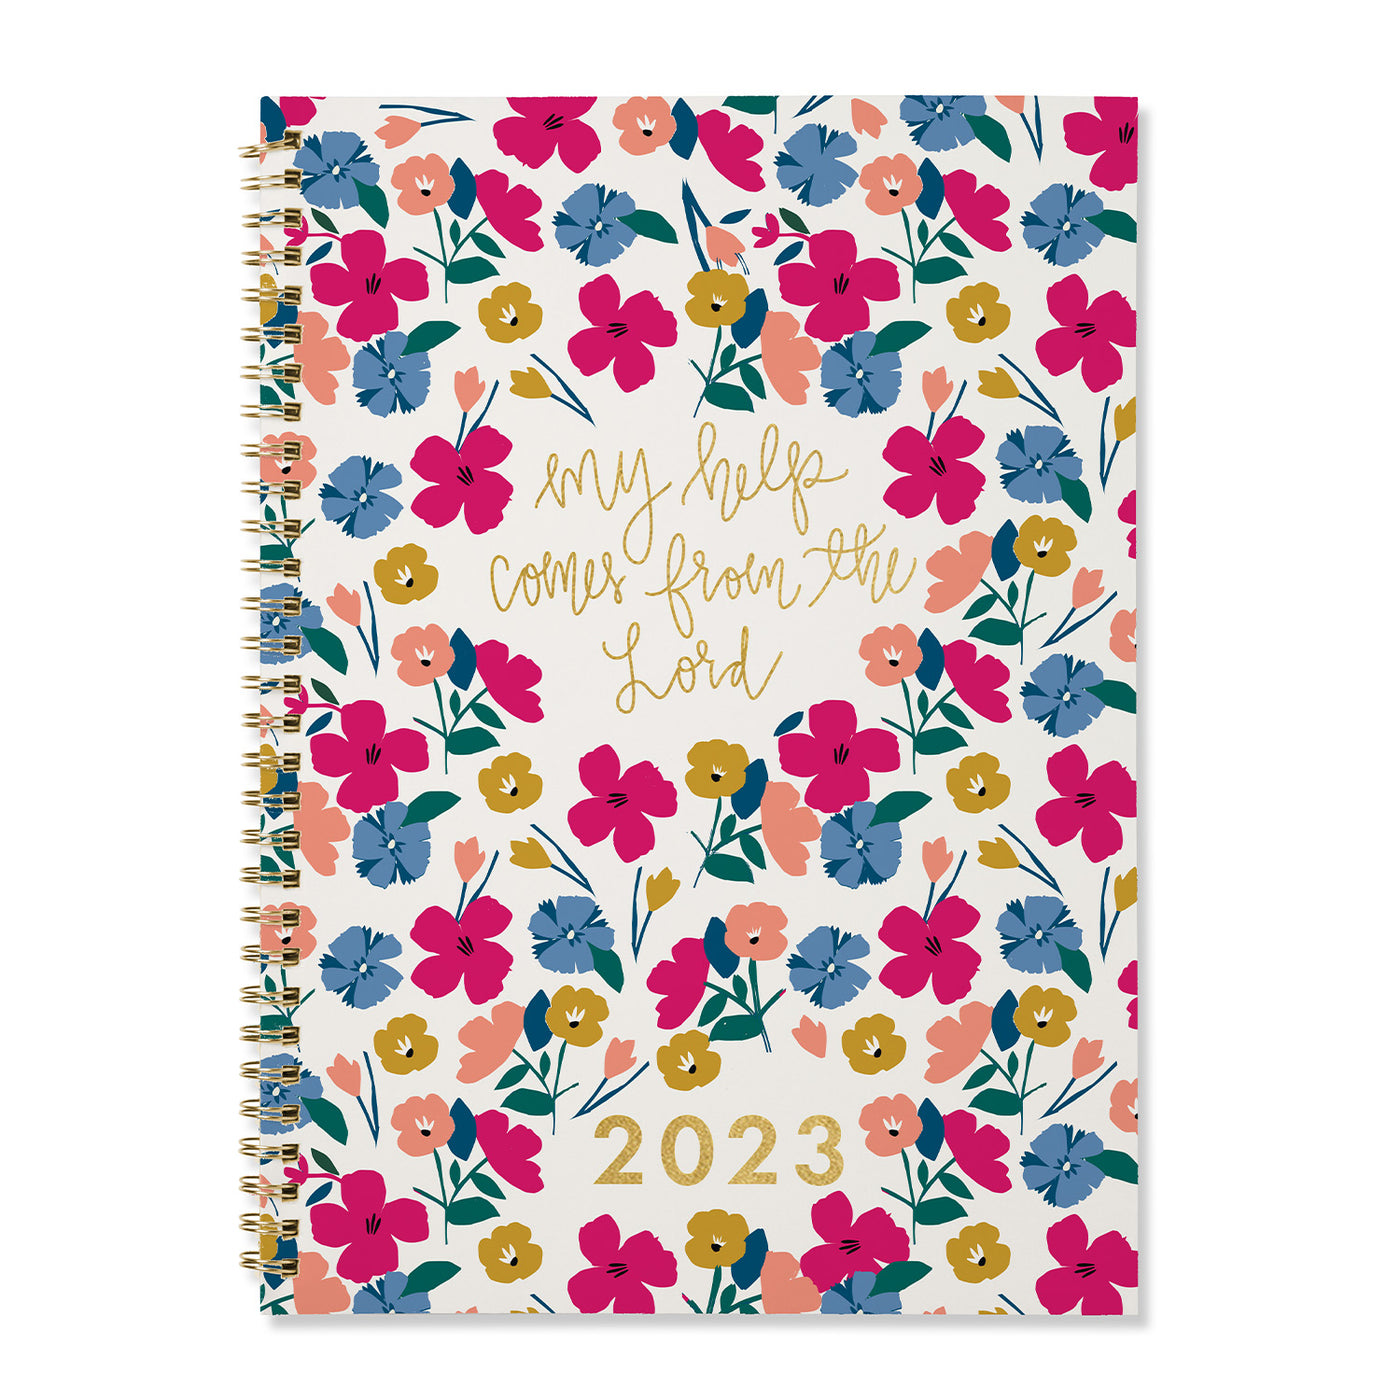 My Help Comes | Large Scripture Planner - Mary Square, LLC